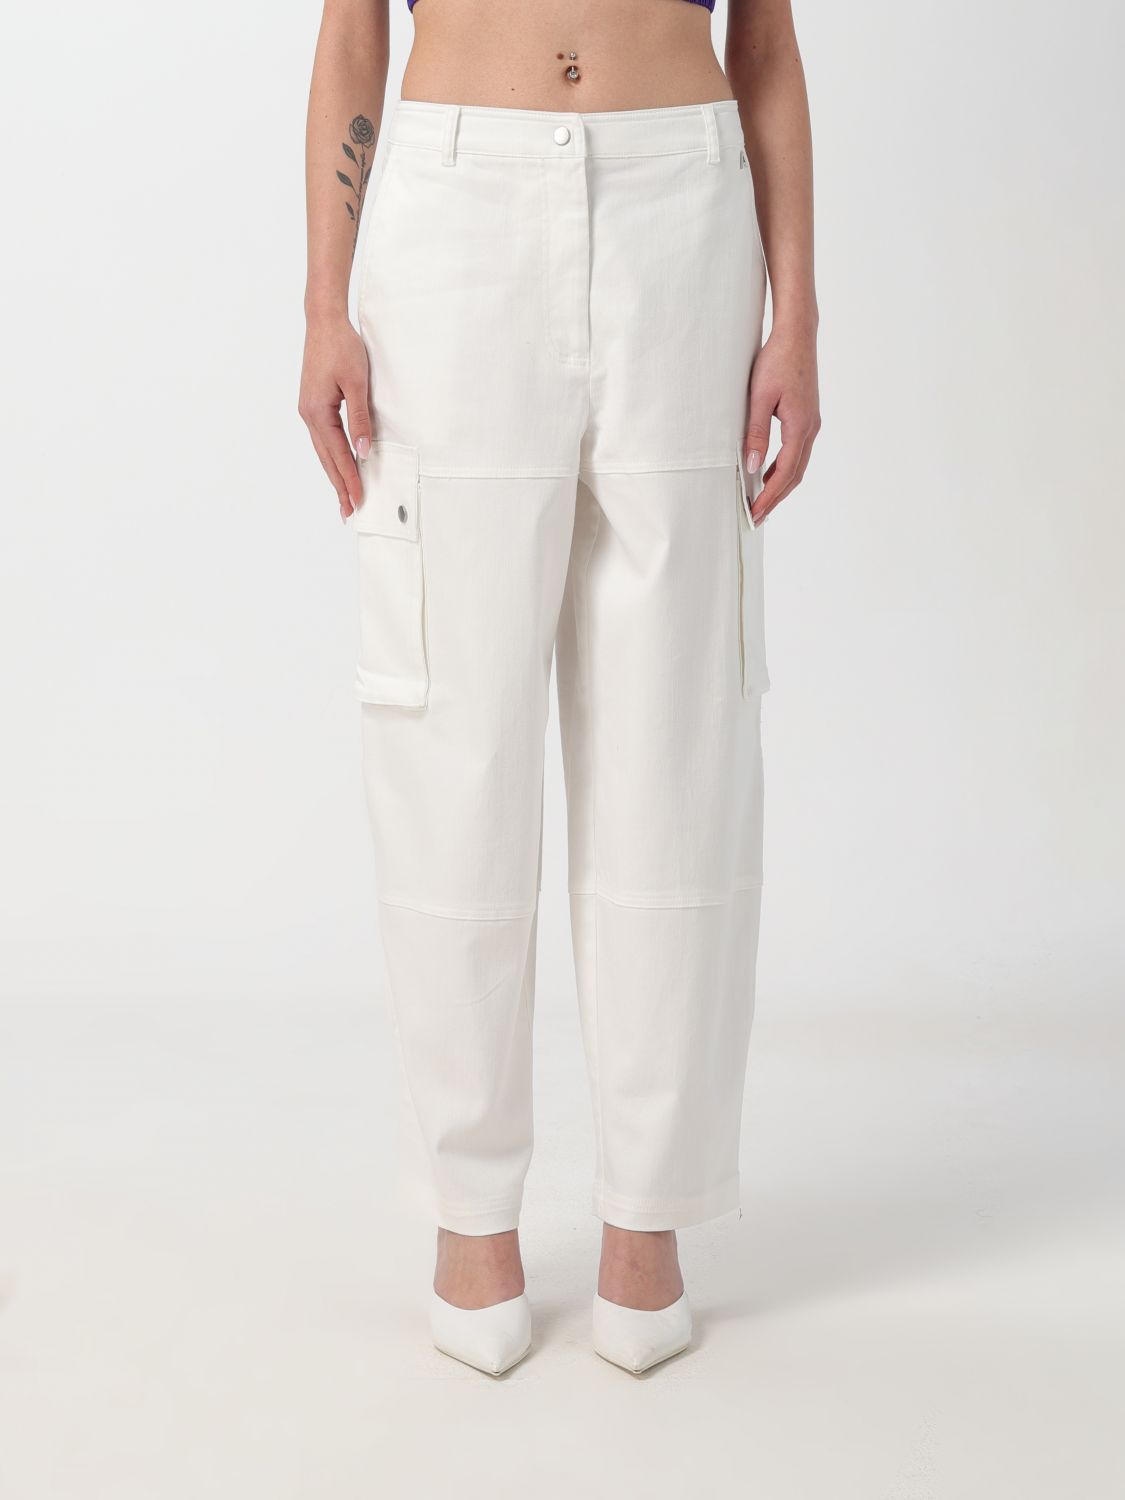 Actitude Twinset Pants ACTITUDE TWINSET Woman color White